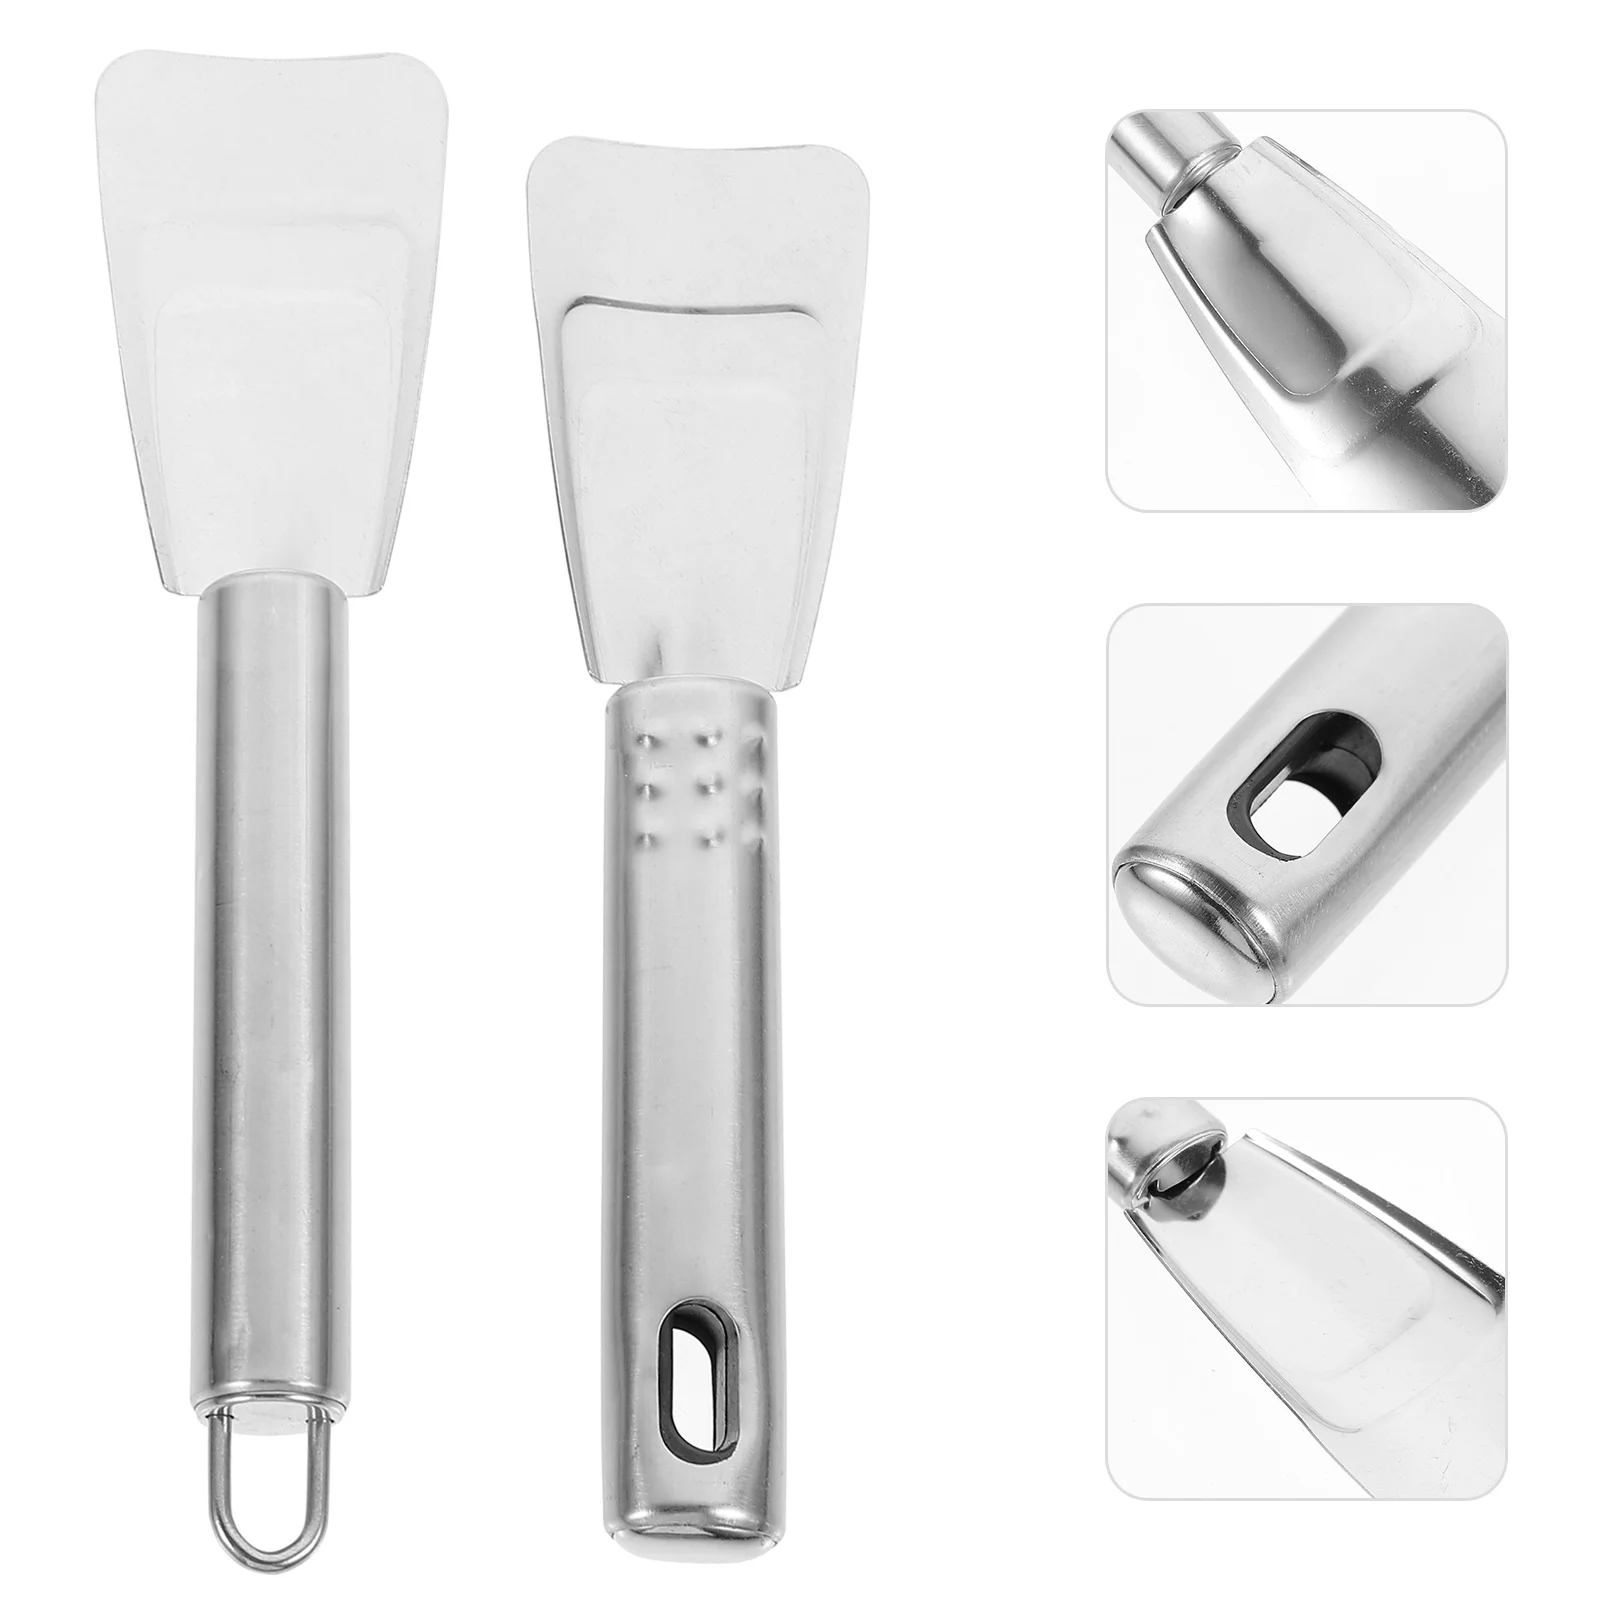 

6 Pcs Stainless Steel Ice Freezer Removal Scoop Home Defrost Scraper Handheld Refrigerator Defroster Deicing